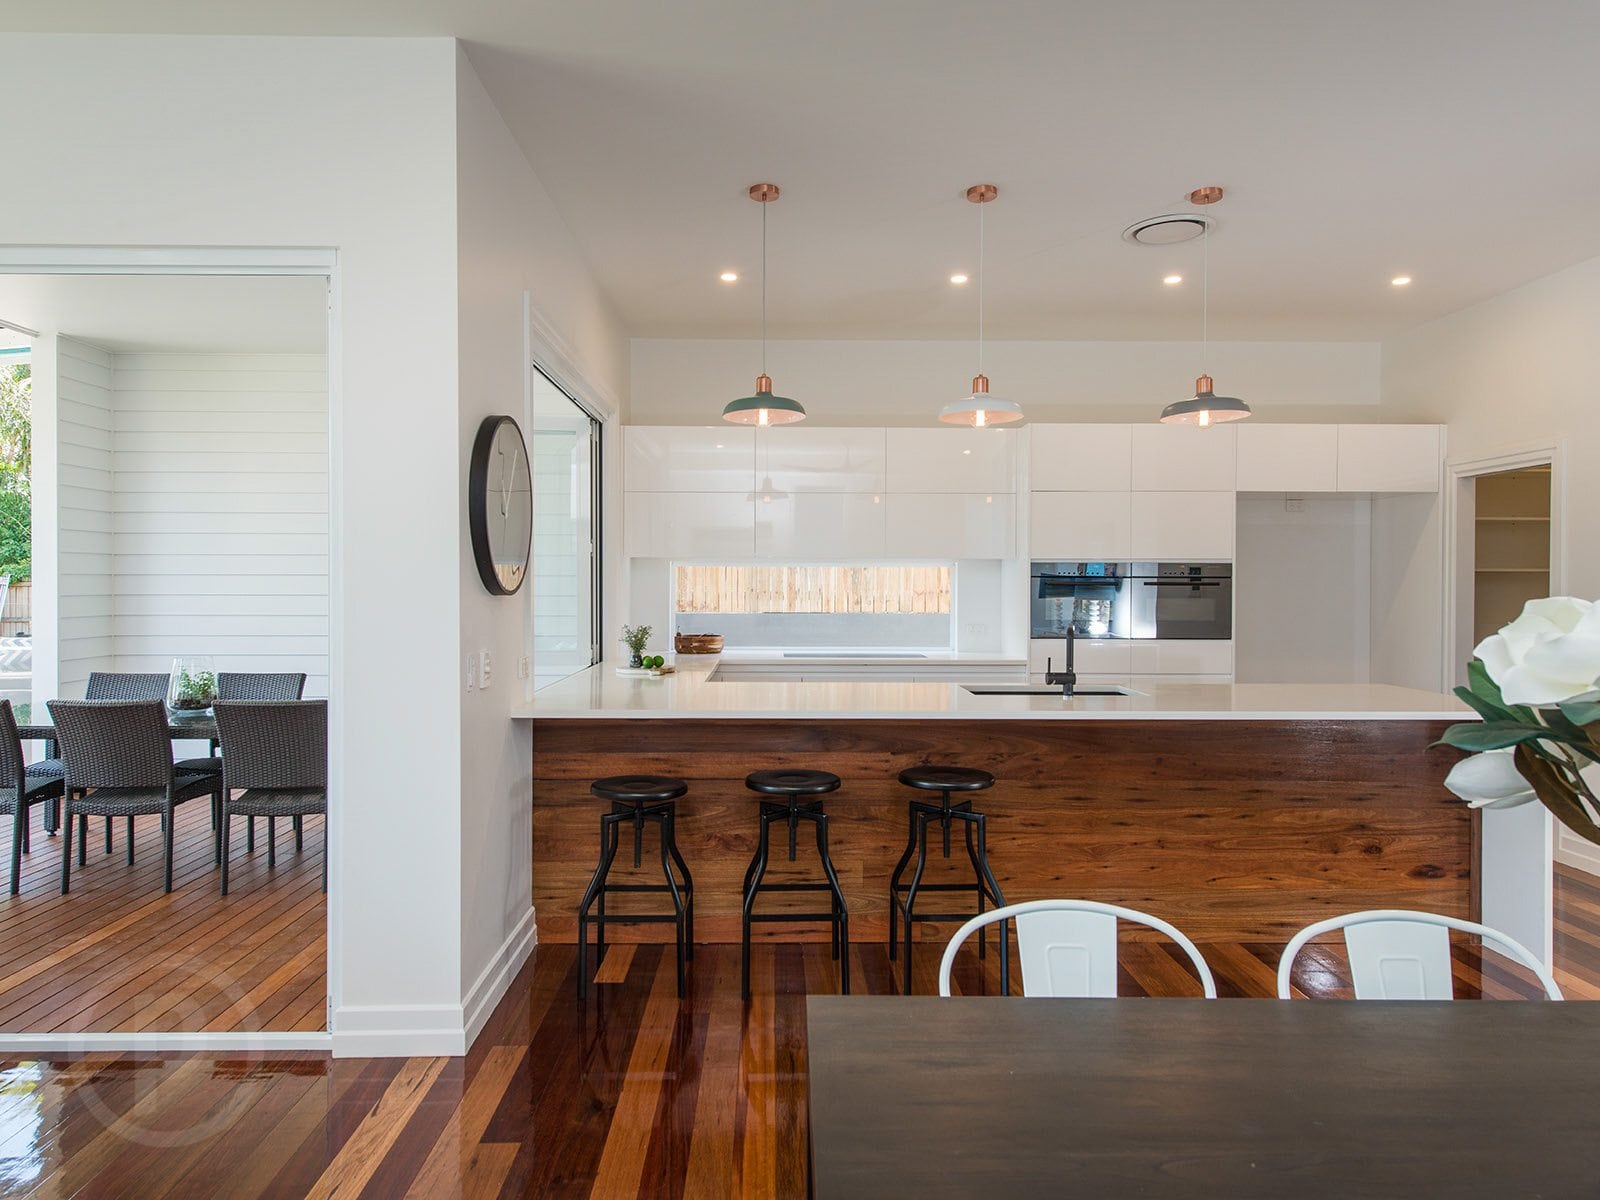 amazing builds kitchen with timber flooring and white walls